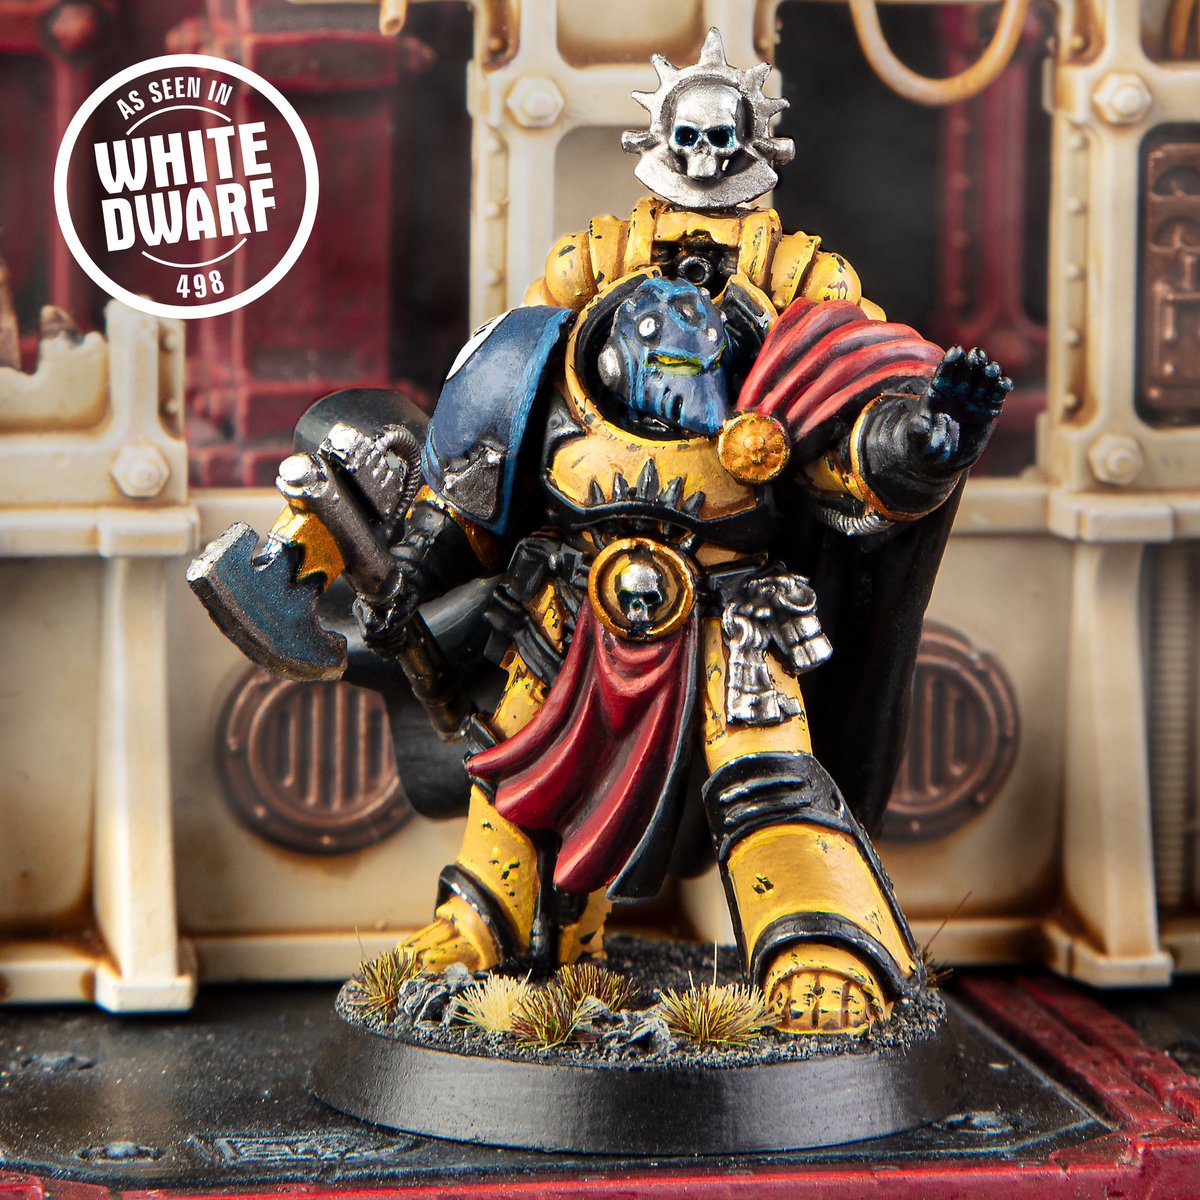 Don’t think I posted this at the time but here’s my Librarian Consul from 498. #whitedwarf #WarhammerCommunity #horusheresy #imperialfists